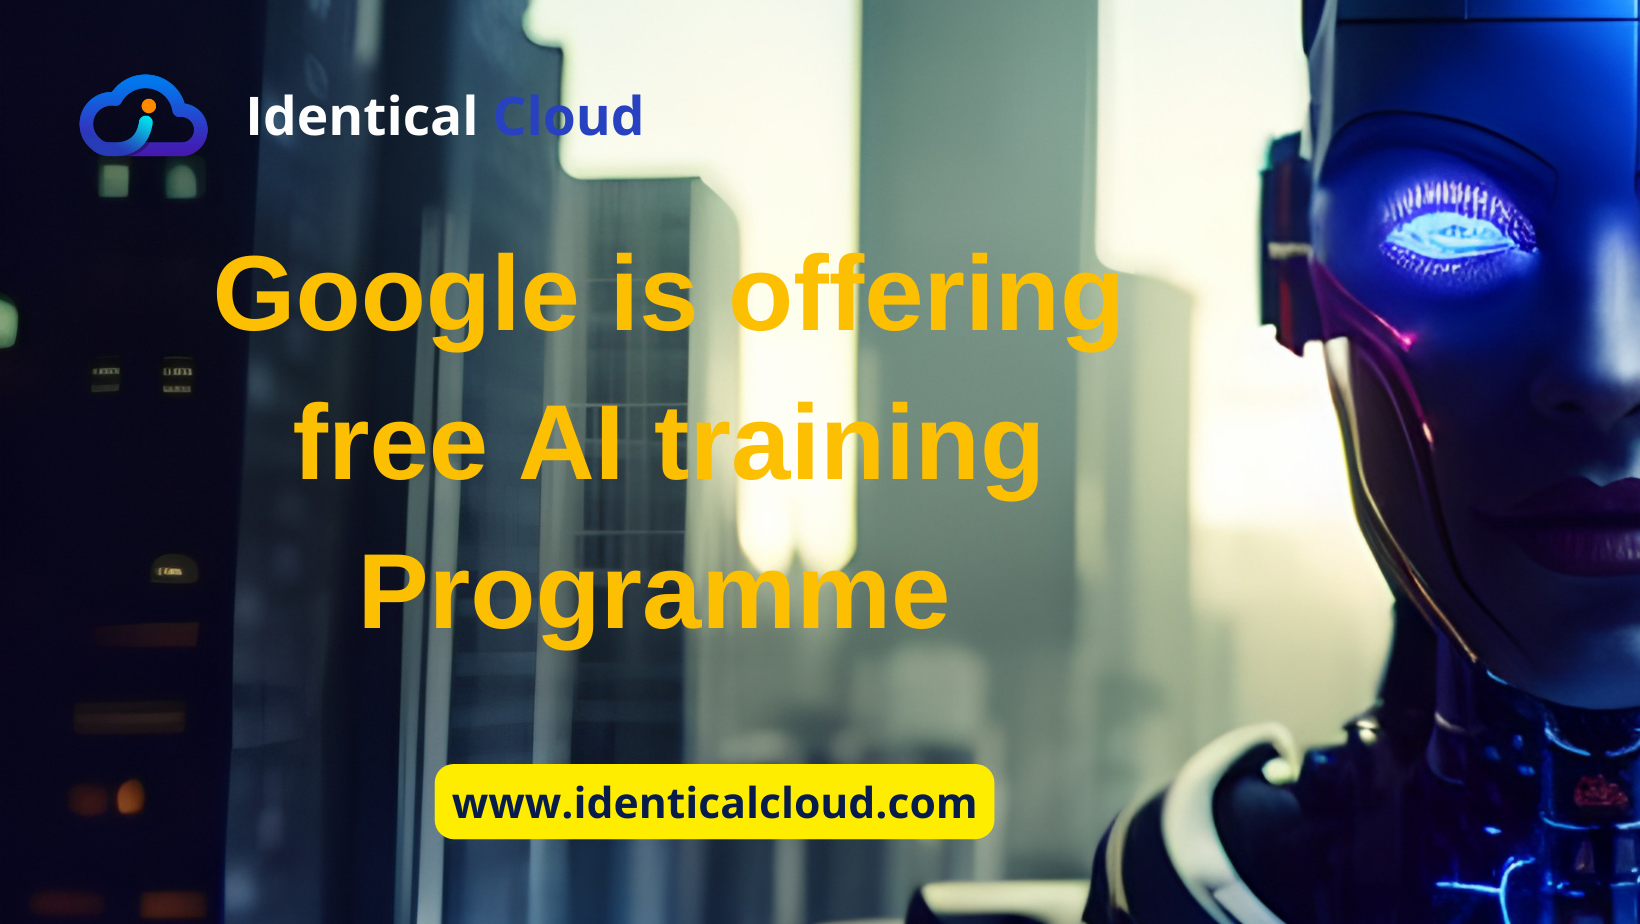 Google is offering free AI training Programme - identicalcloud.com